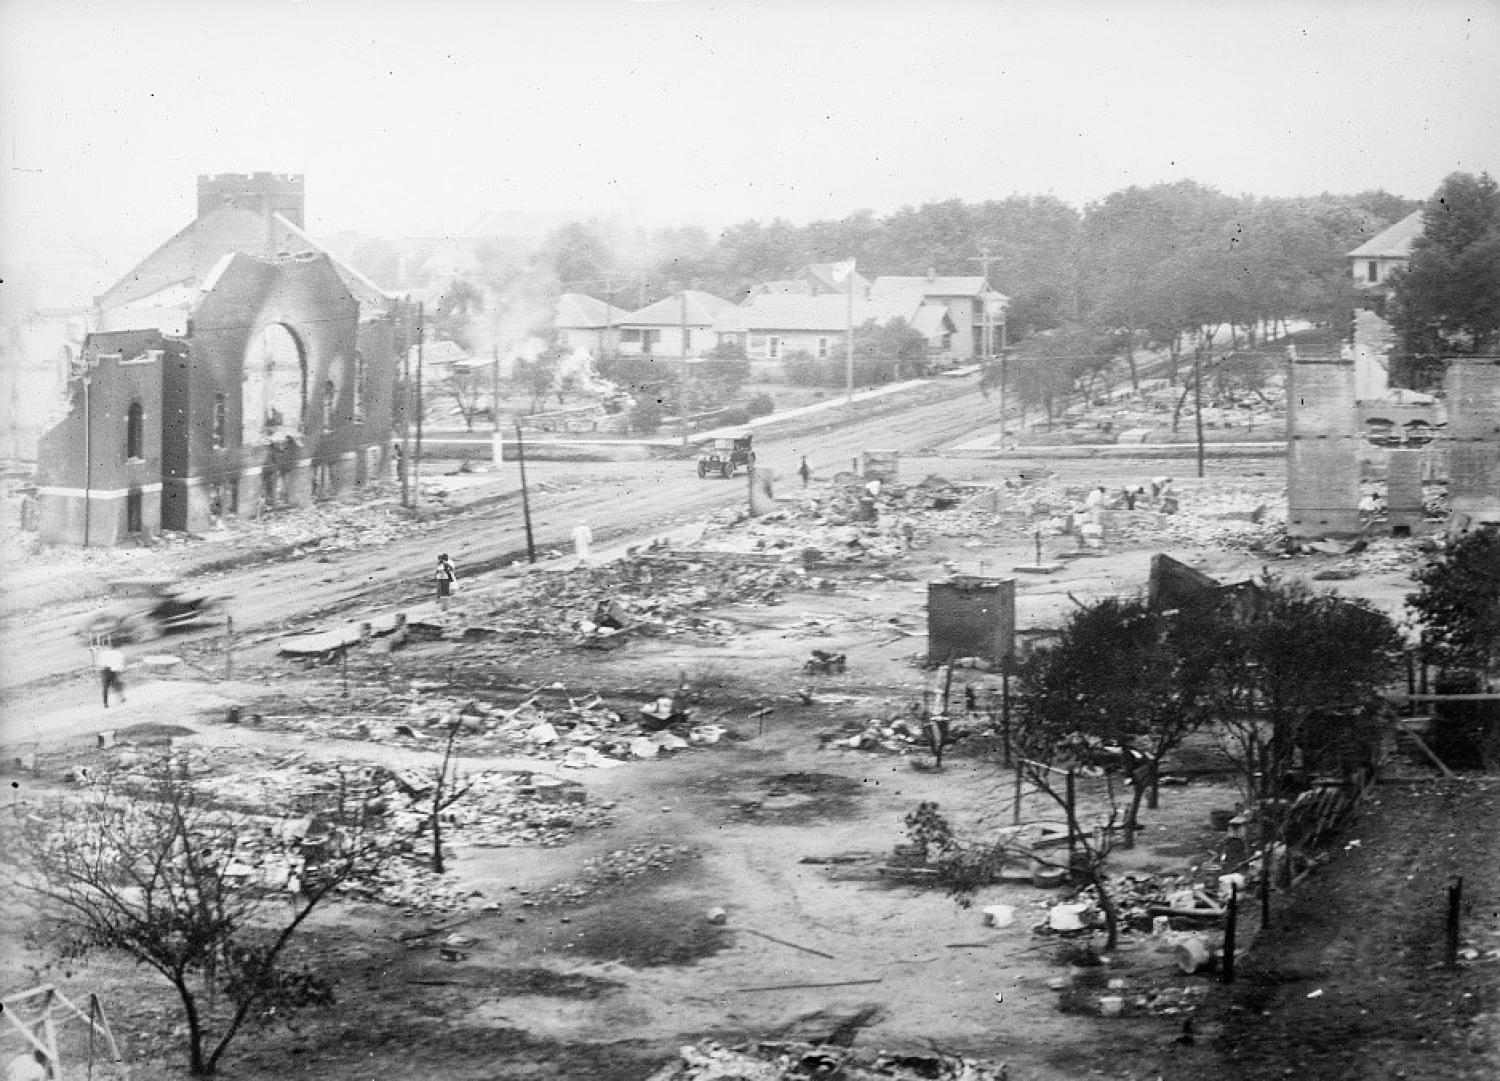 The Greenwood district of Tulsa in ruins after the Tulsa Race Massacre